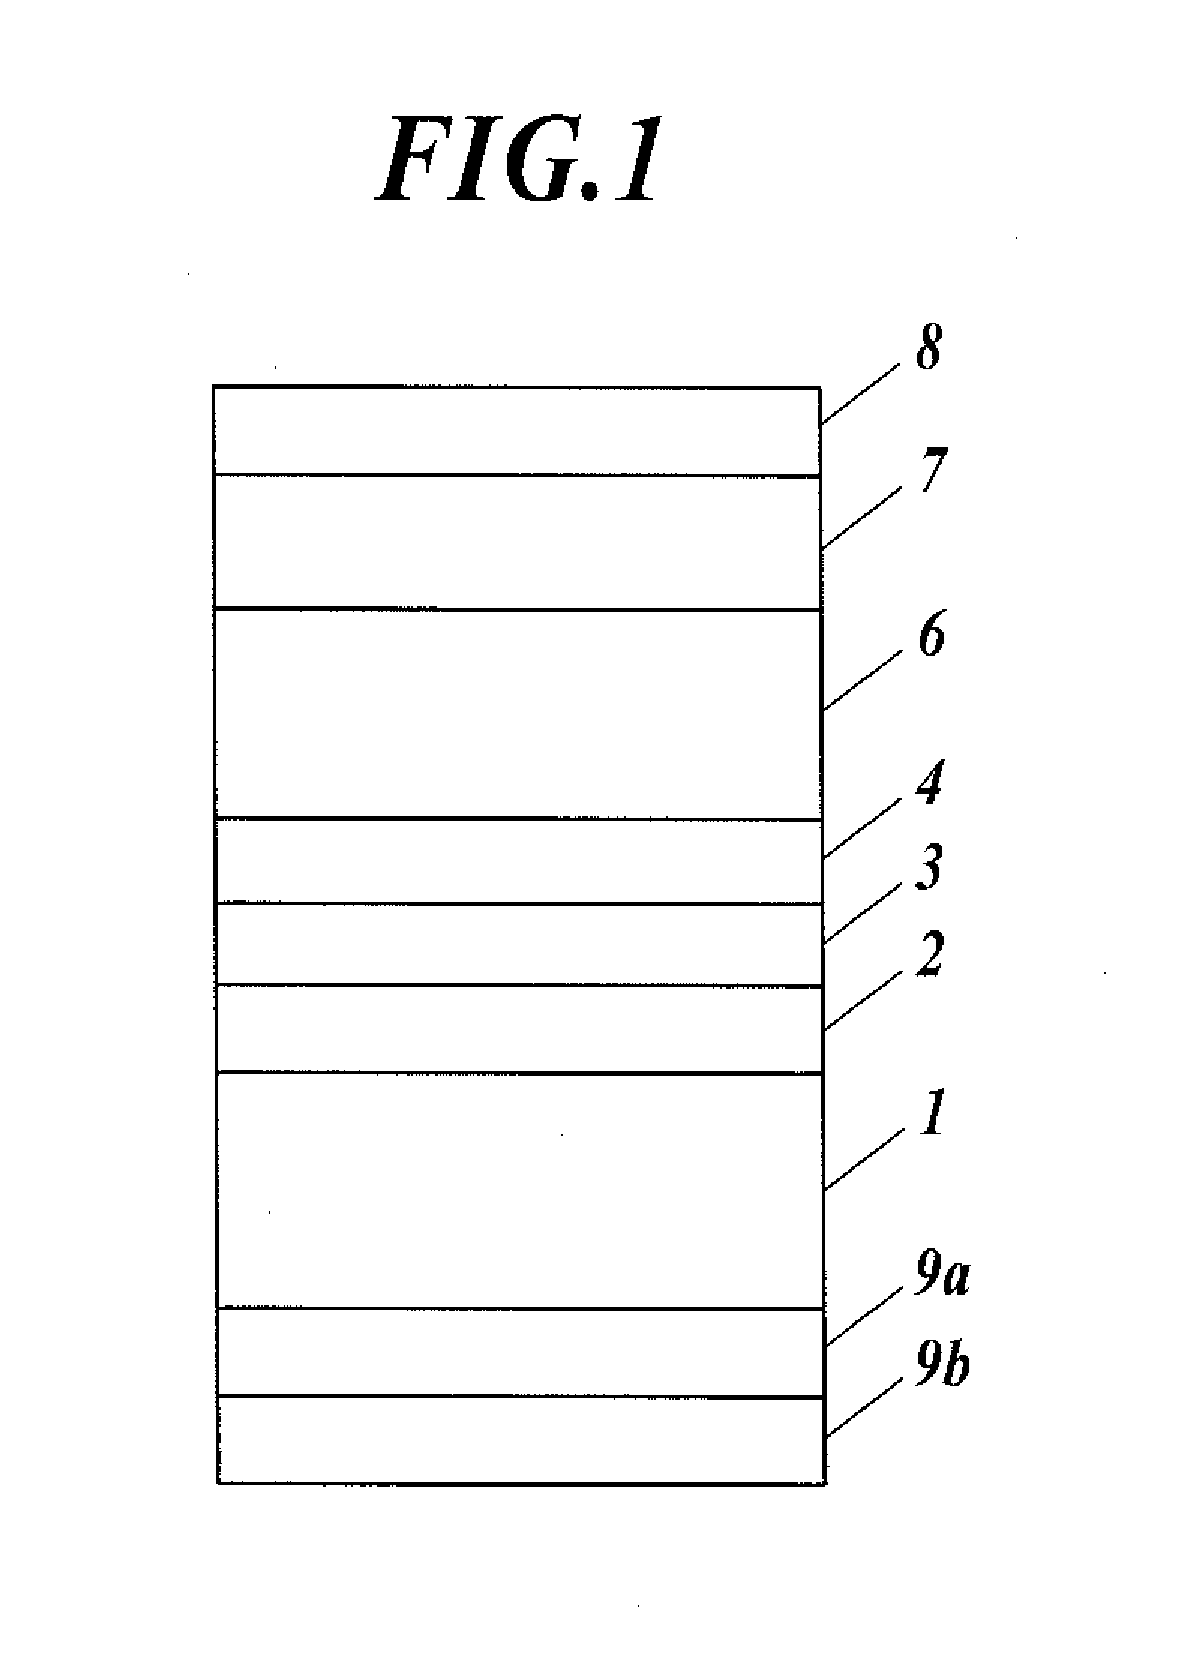 Film mirror for solar light reflection, and reflective device for solar power generation